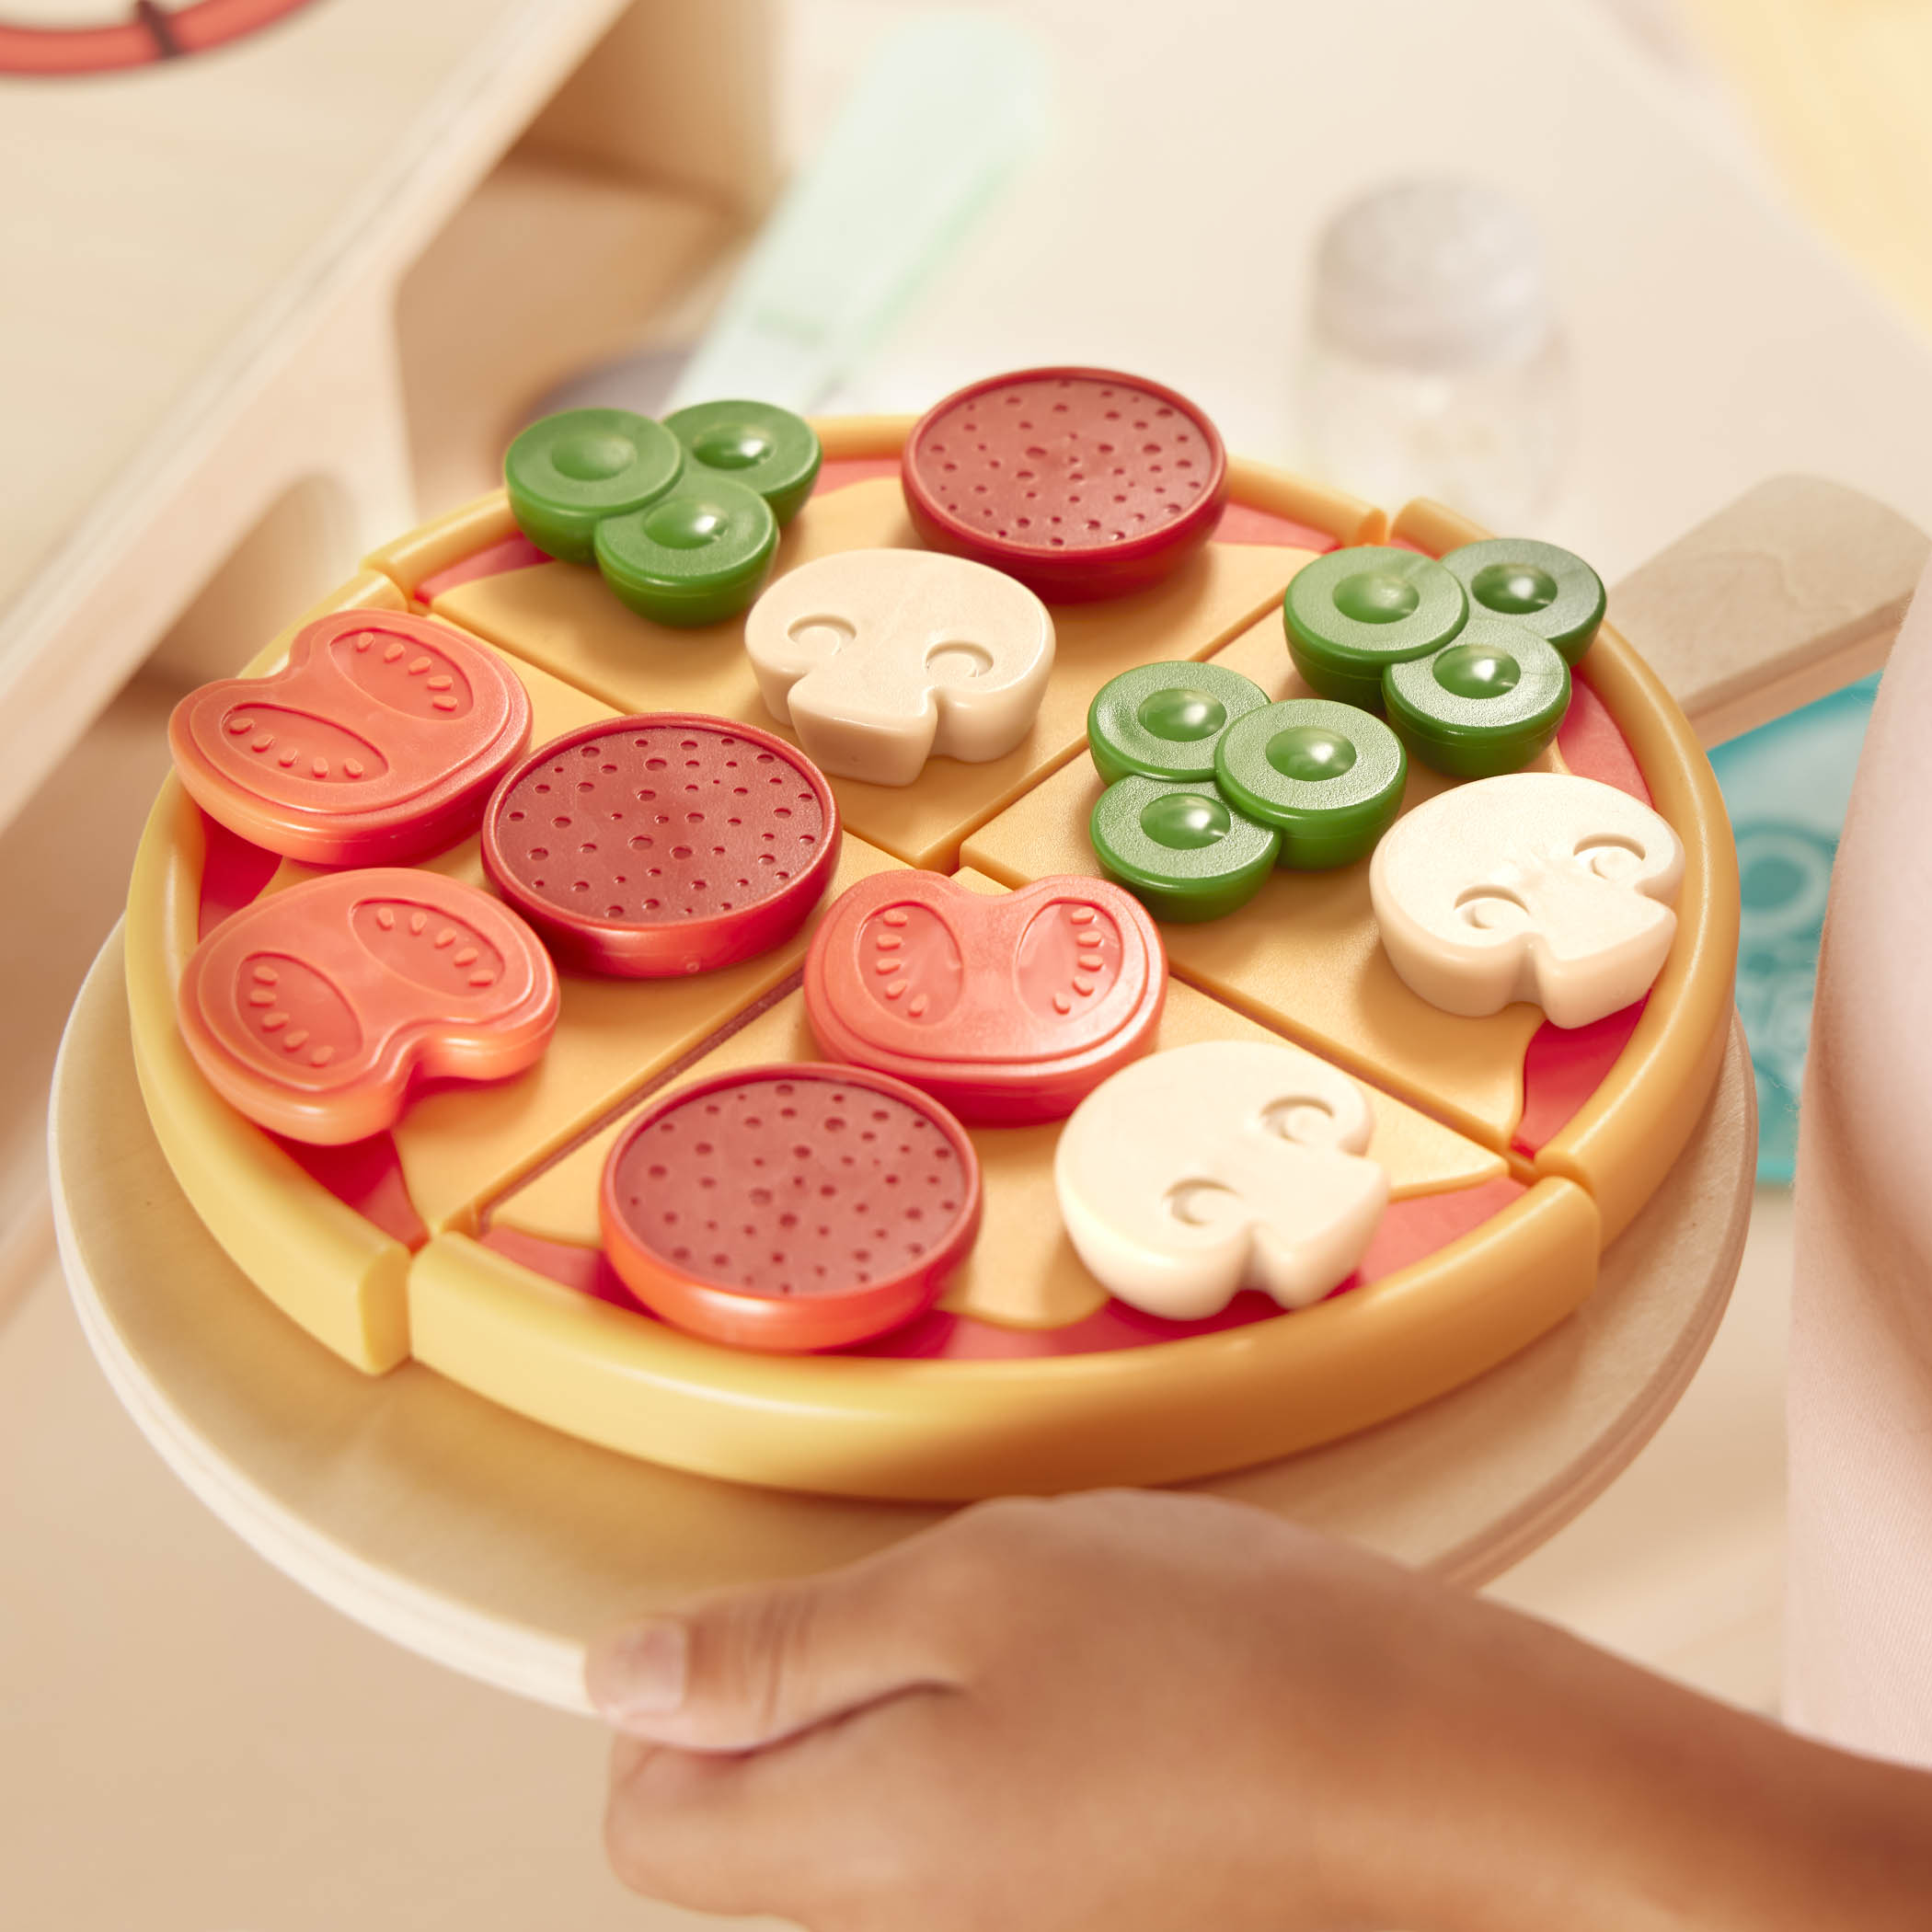 Pizza set - Play-Doh Pizza Chef - Play-Doh - Pizza - set Jouets - Pizza Toy